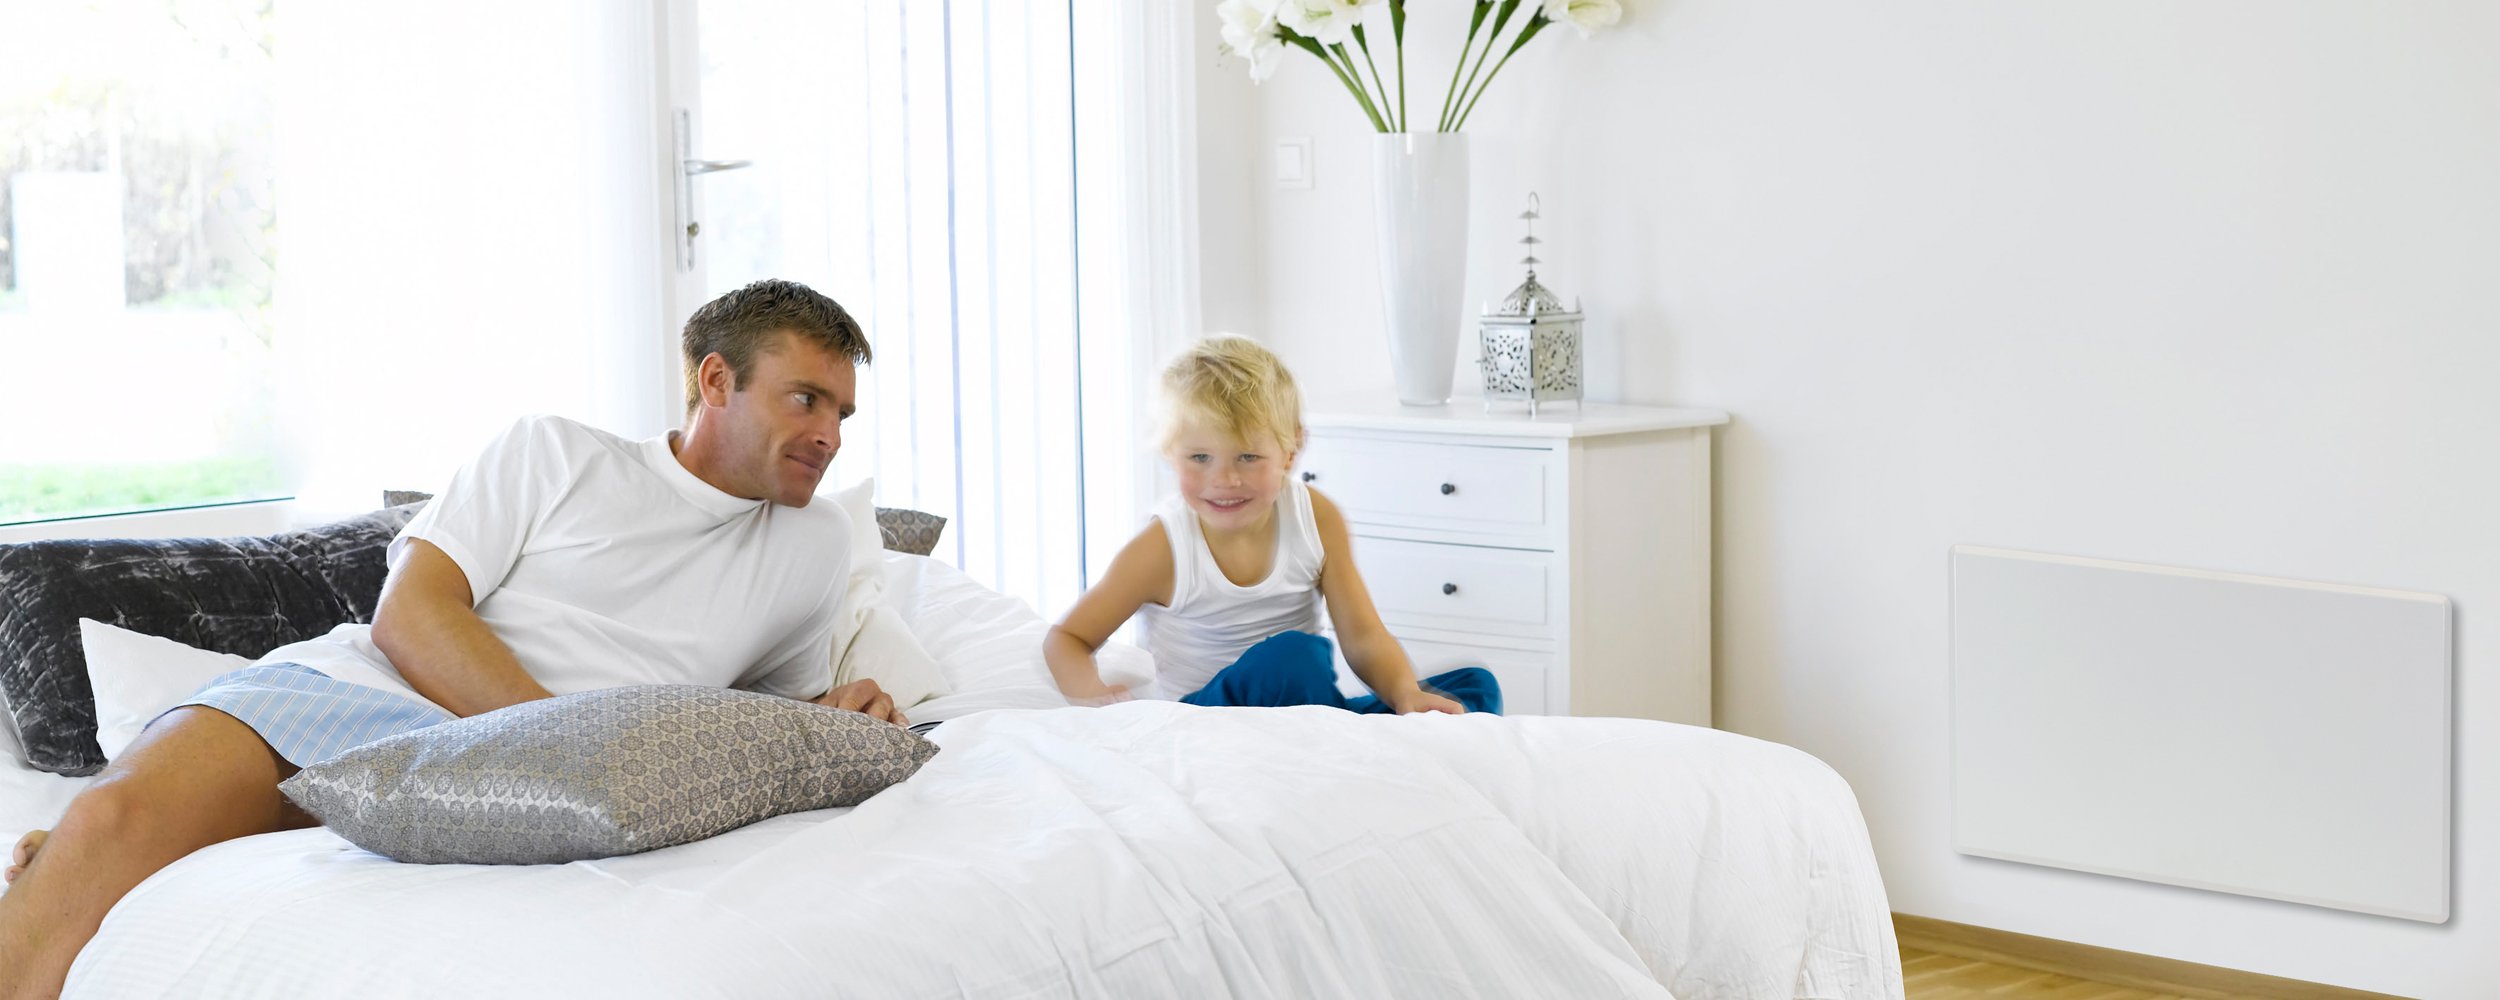 Father and young son sitting on a bed surrounded by white coloured furniture and an electric panel heater attached to the wall